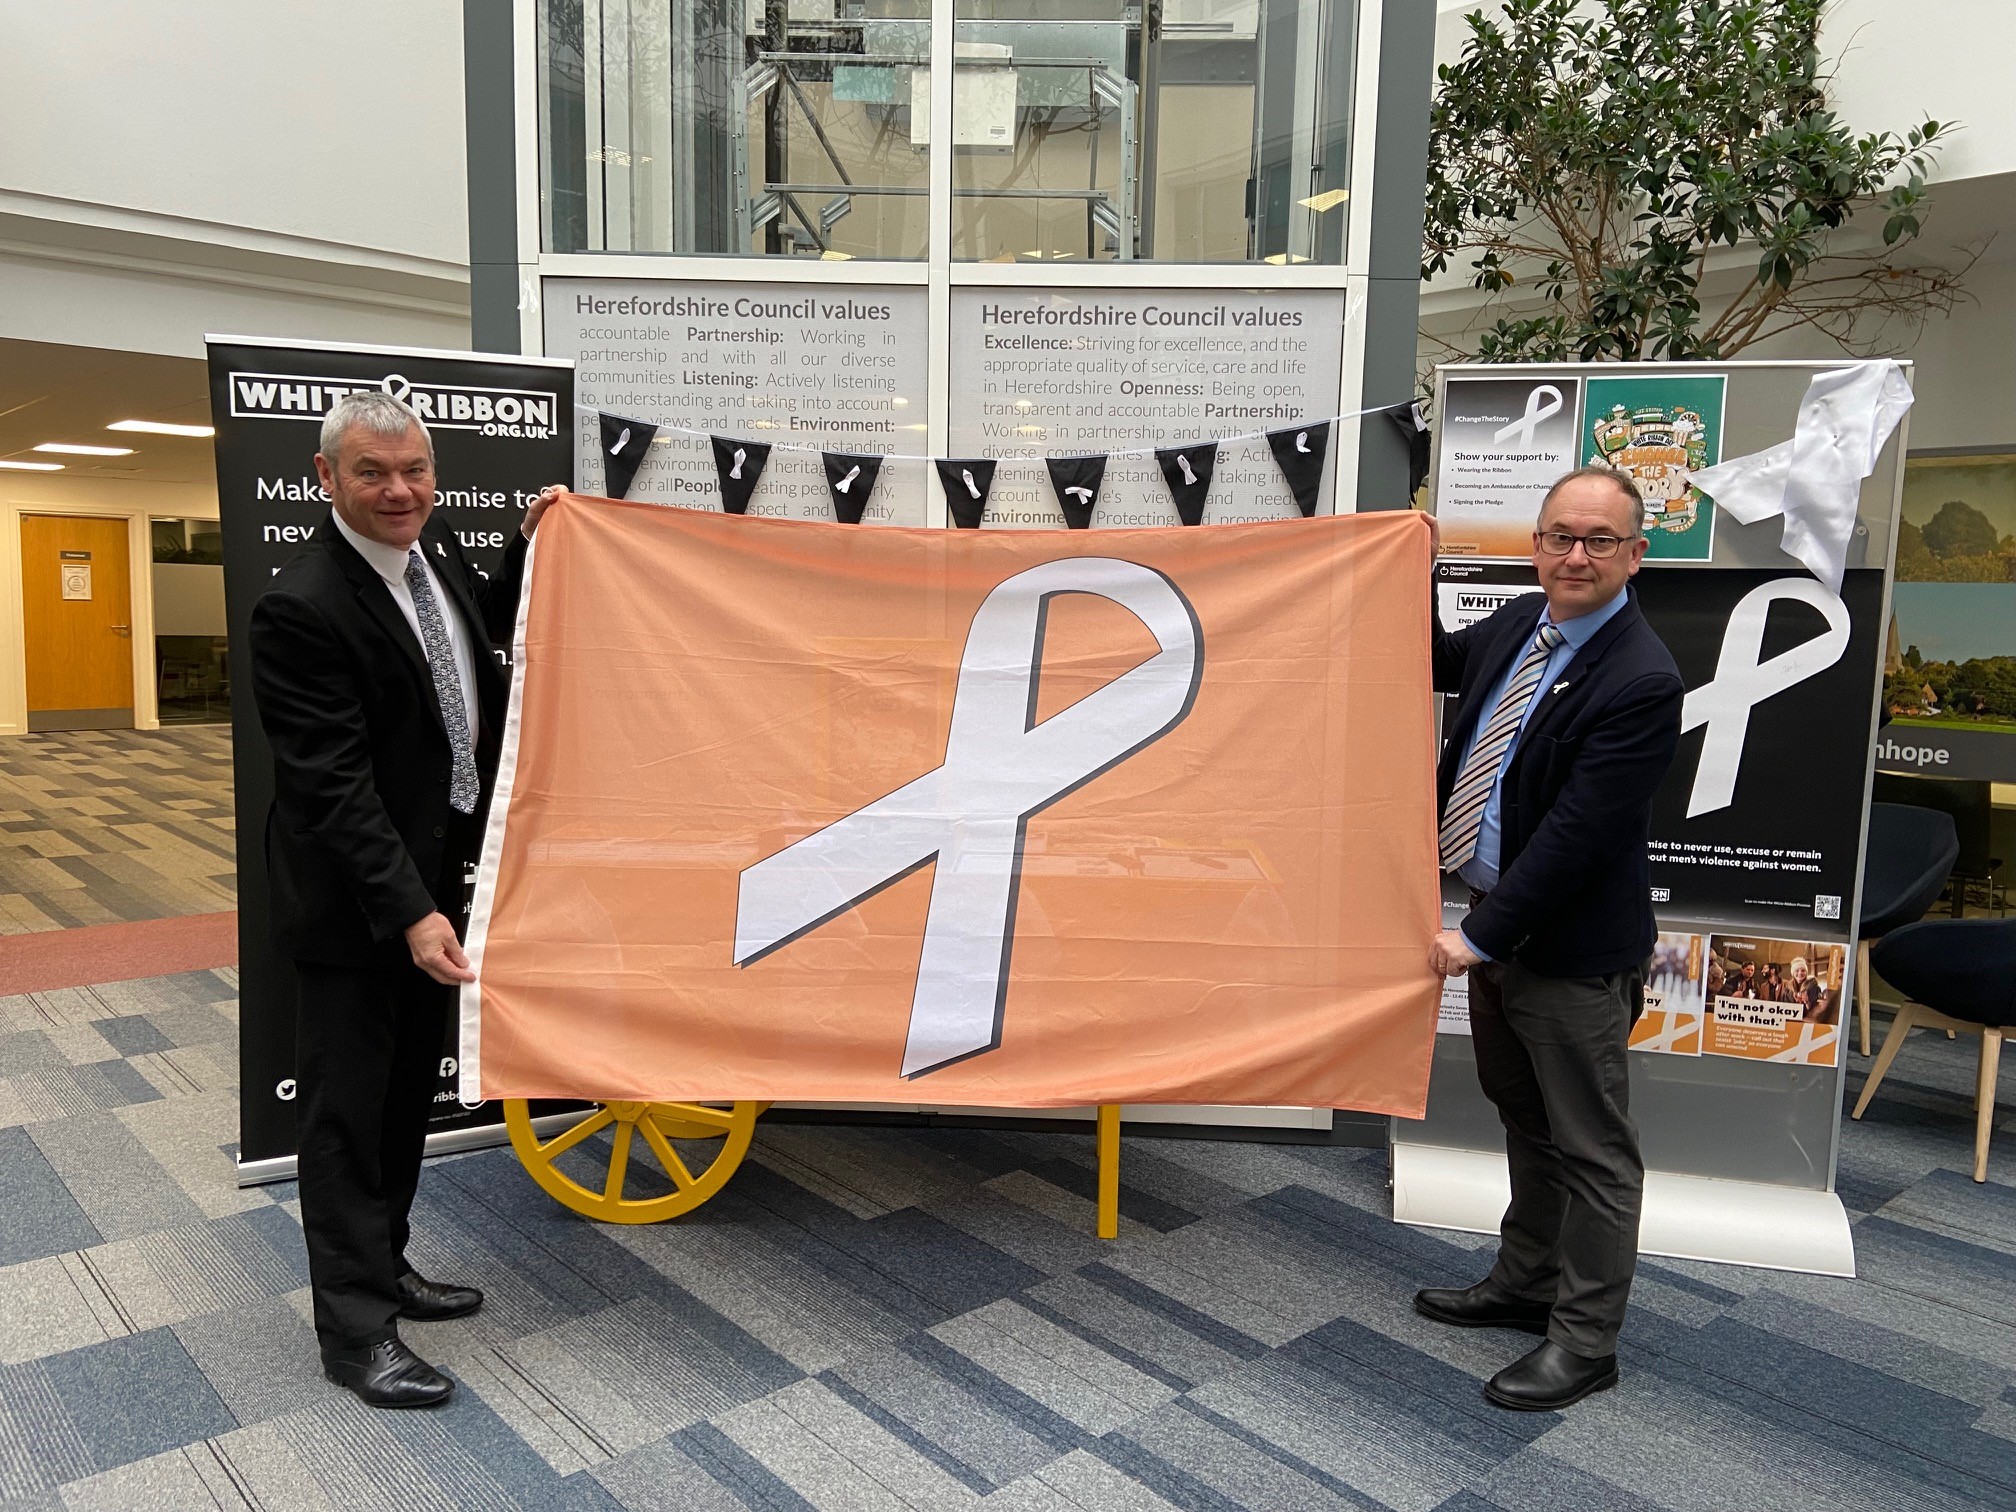 Paul Walker and Cllr Jonathan Lester holding a white ribbon flag